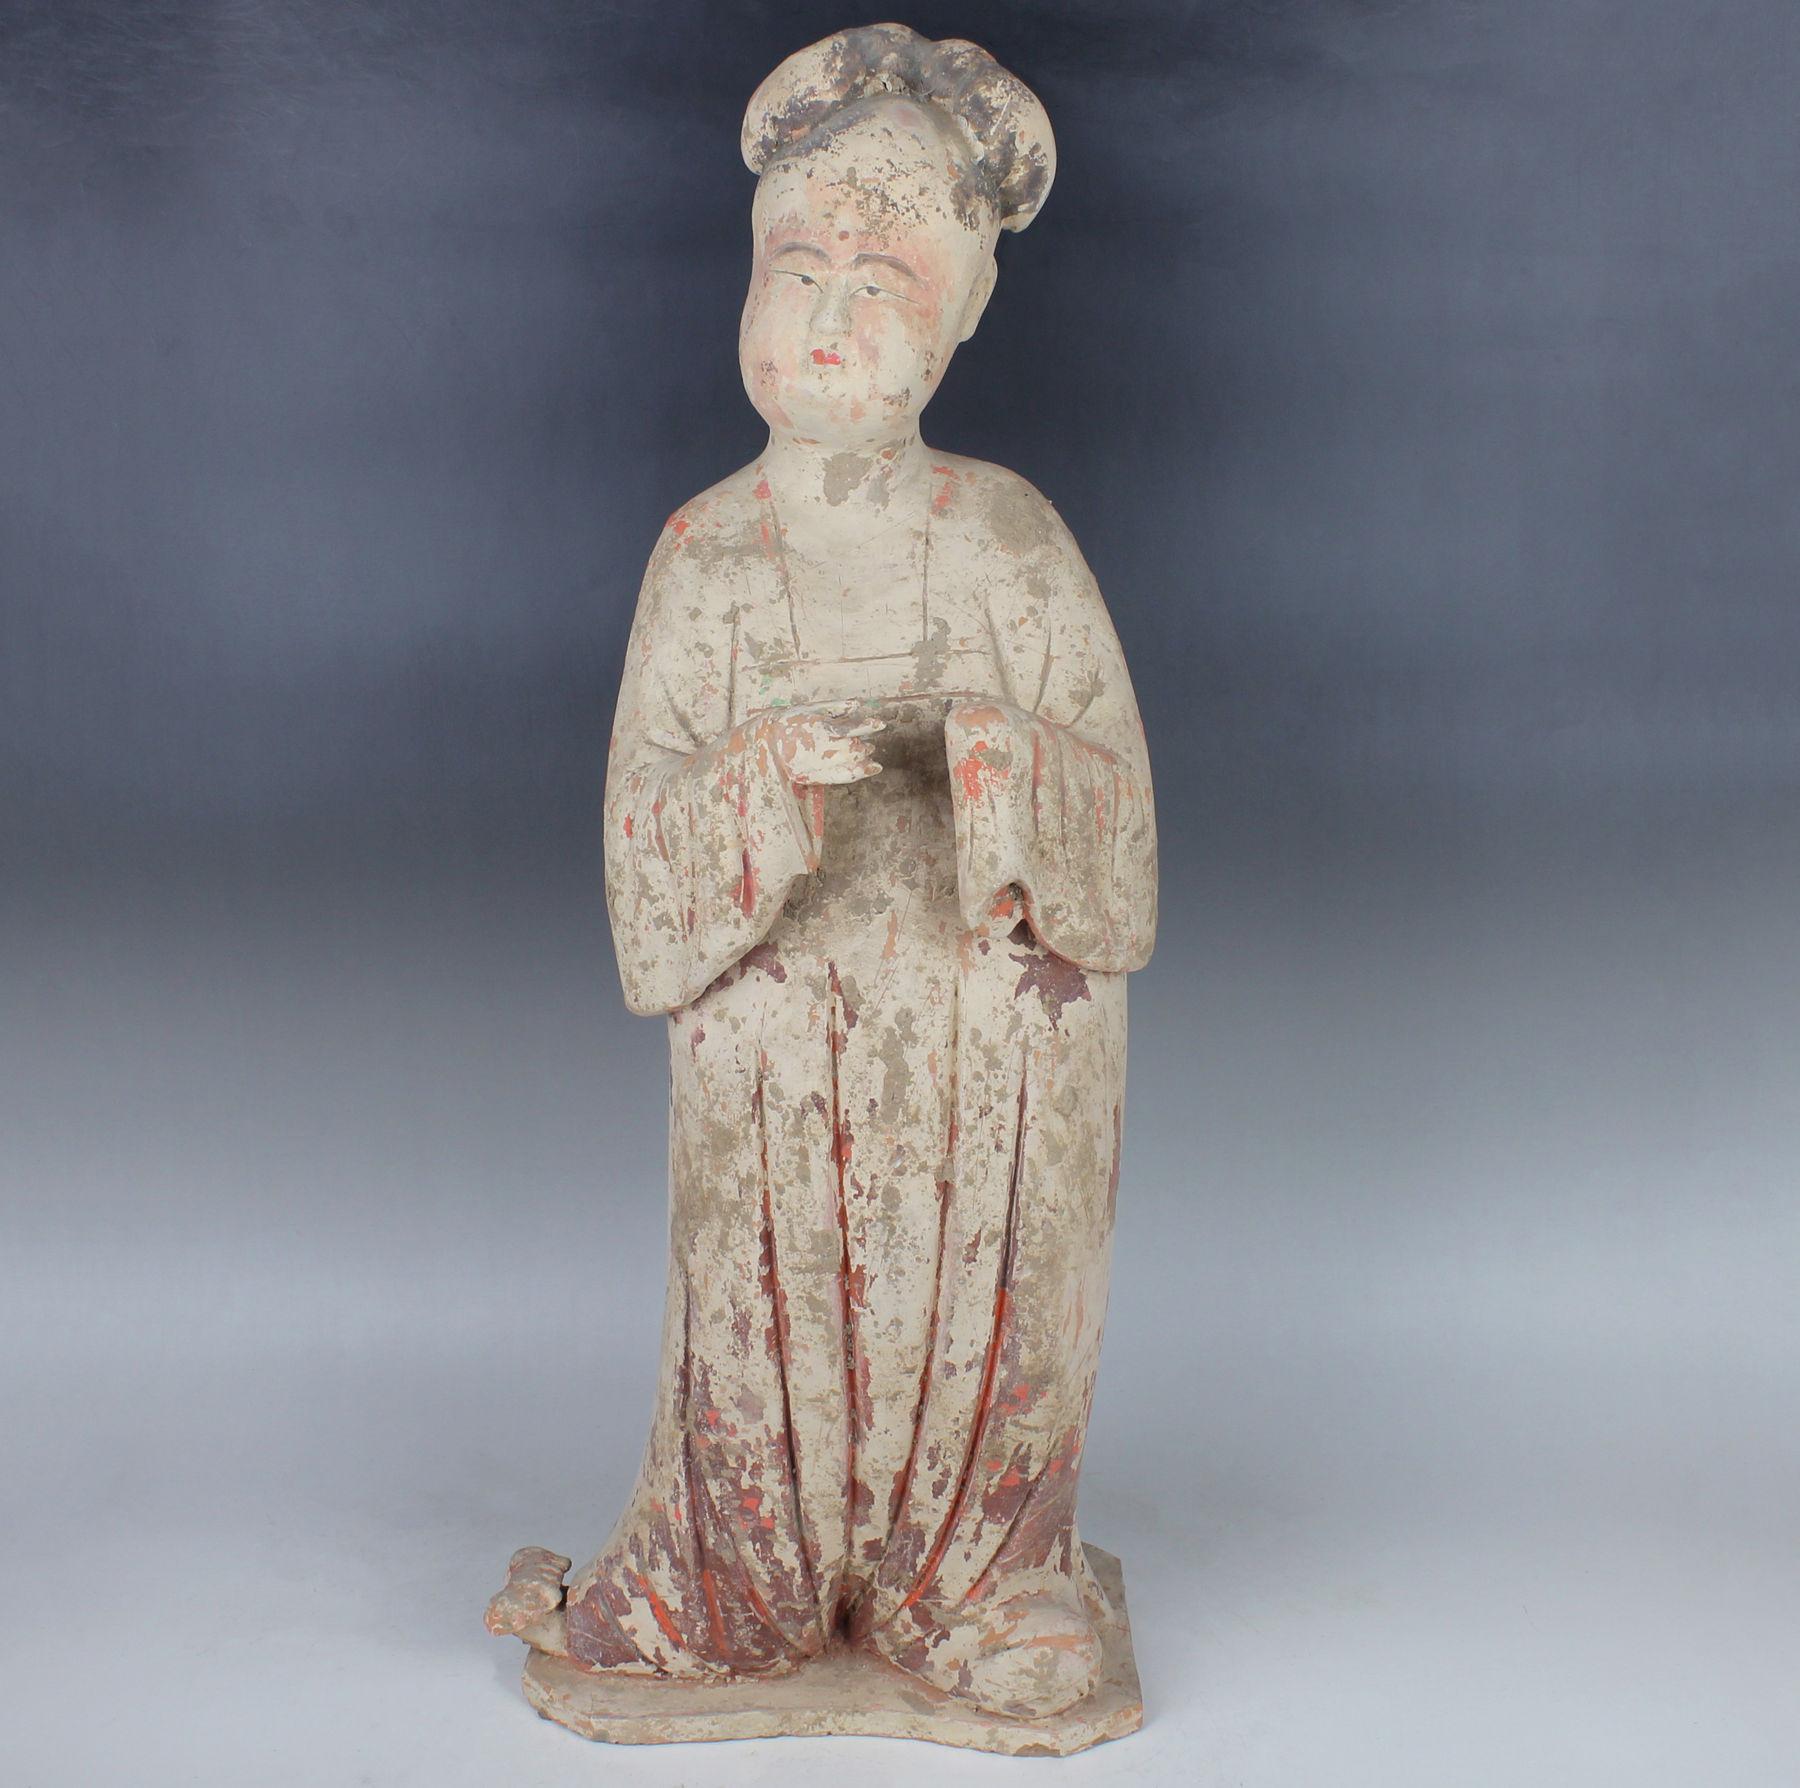 ITEM: Statuette of a Fat Lady
MATERIAL: Pottery
CULTURE: Chinese, Tang Dynasty
PERIOD: 618 – 907 A.D
DIMENSIONS: 645 mm x 260 mm x 180 mm
CONDITION: Good condition. Includes Thermoluminescence test by Laboratory Kotalla (Reference 04B101123).